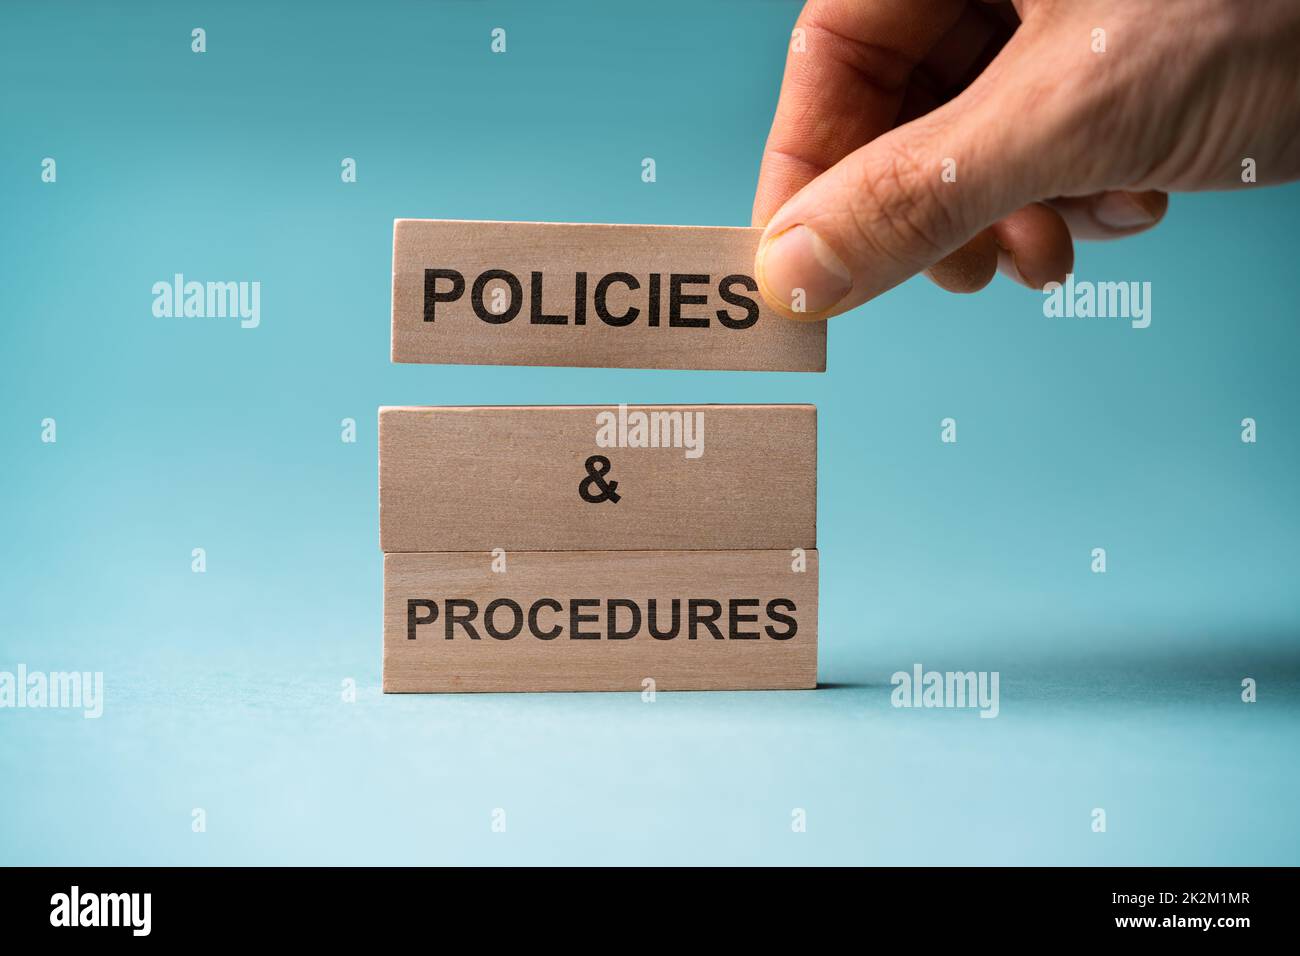 Business Policy And Procedure Strategy Stock Photo